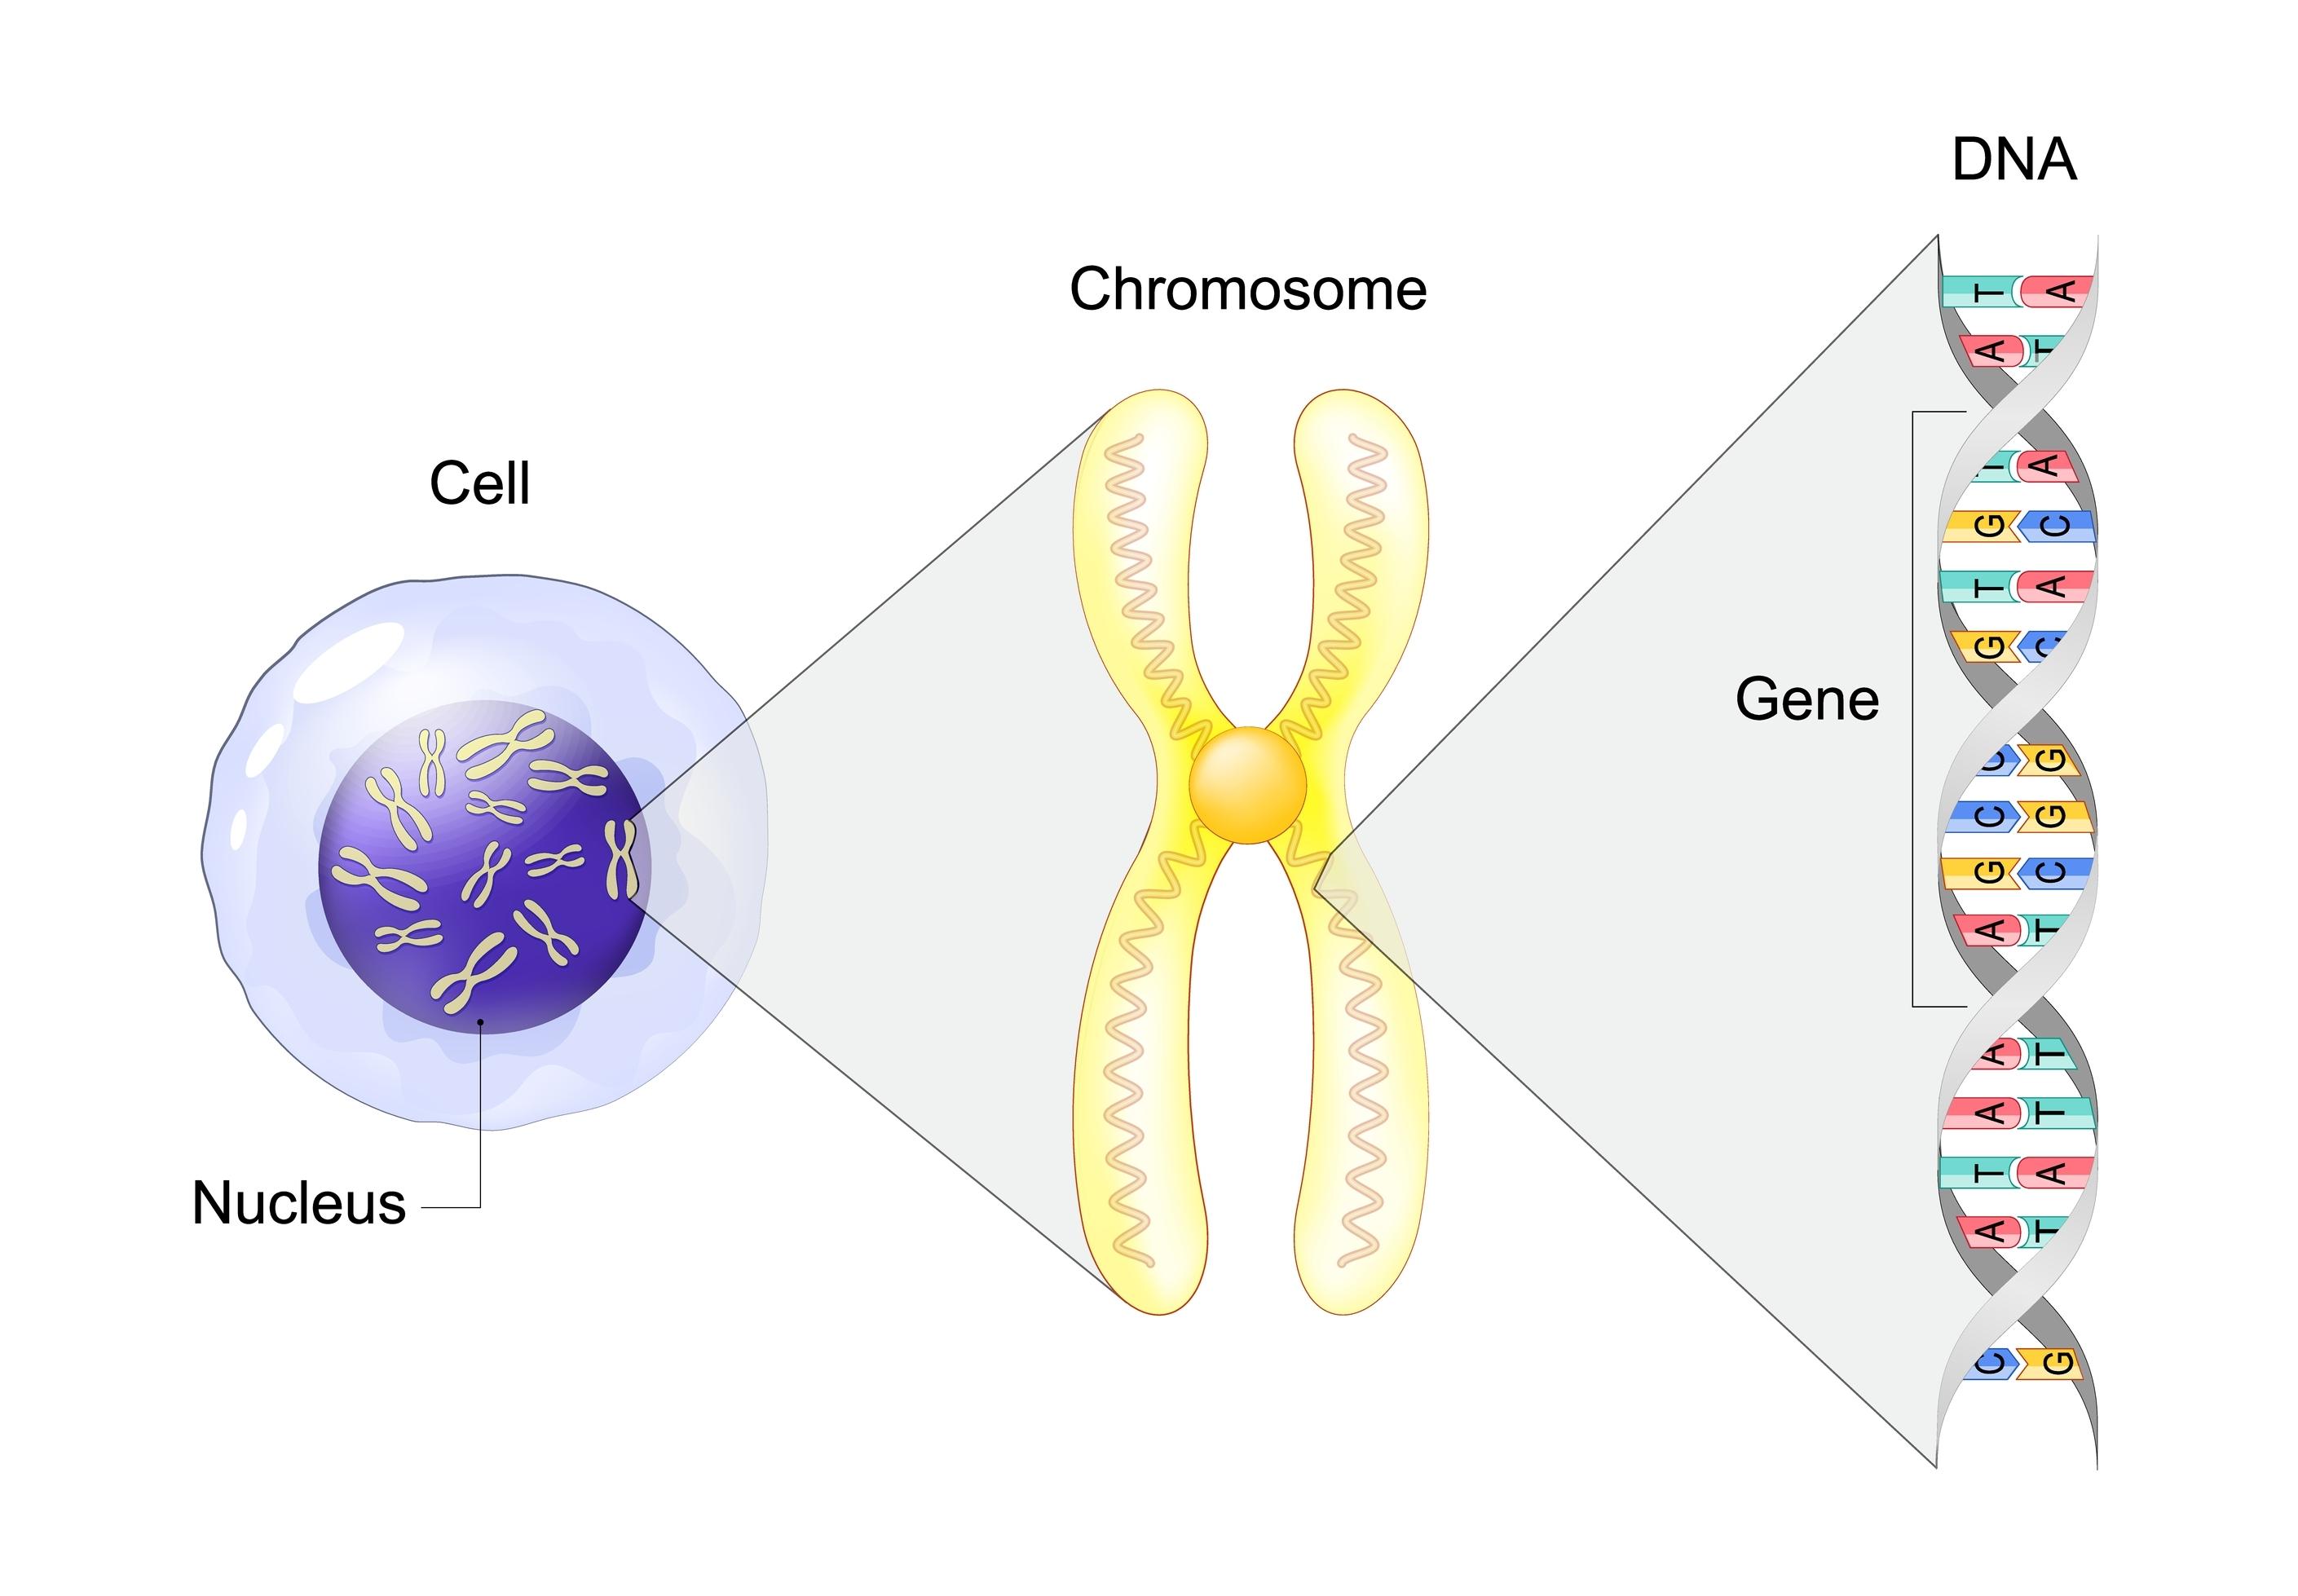 Illustration showing a cell, chromosome, gene and DNA